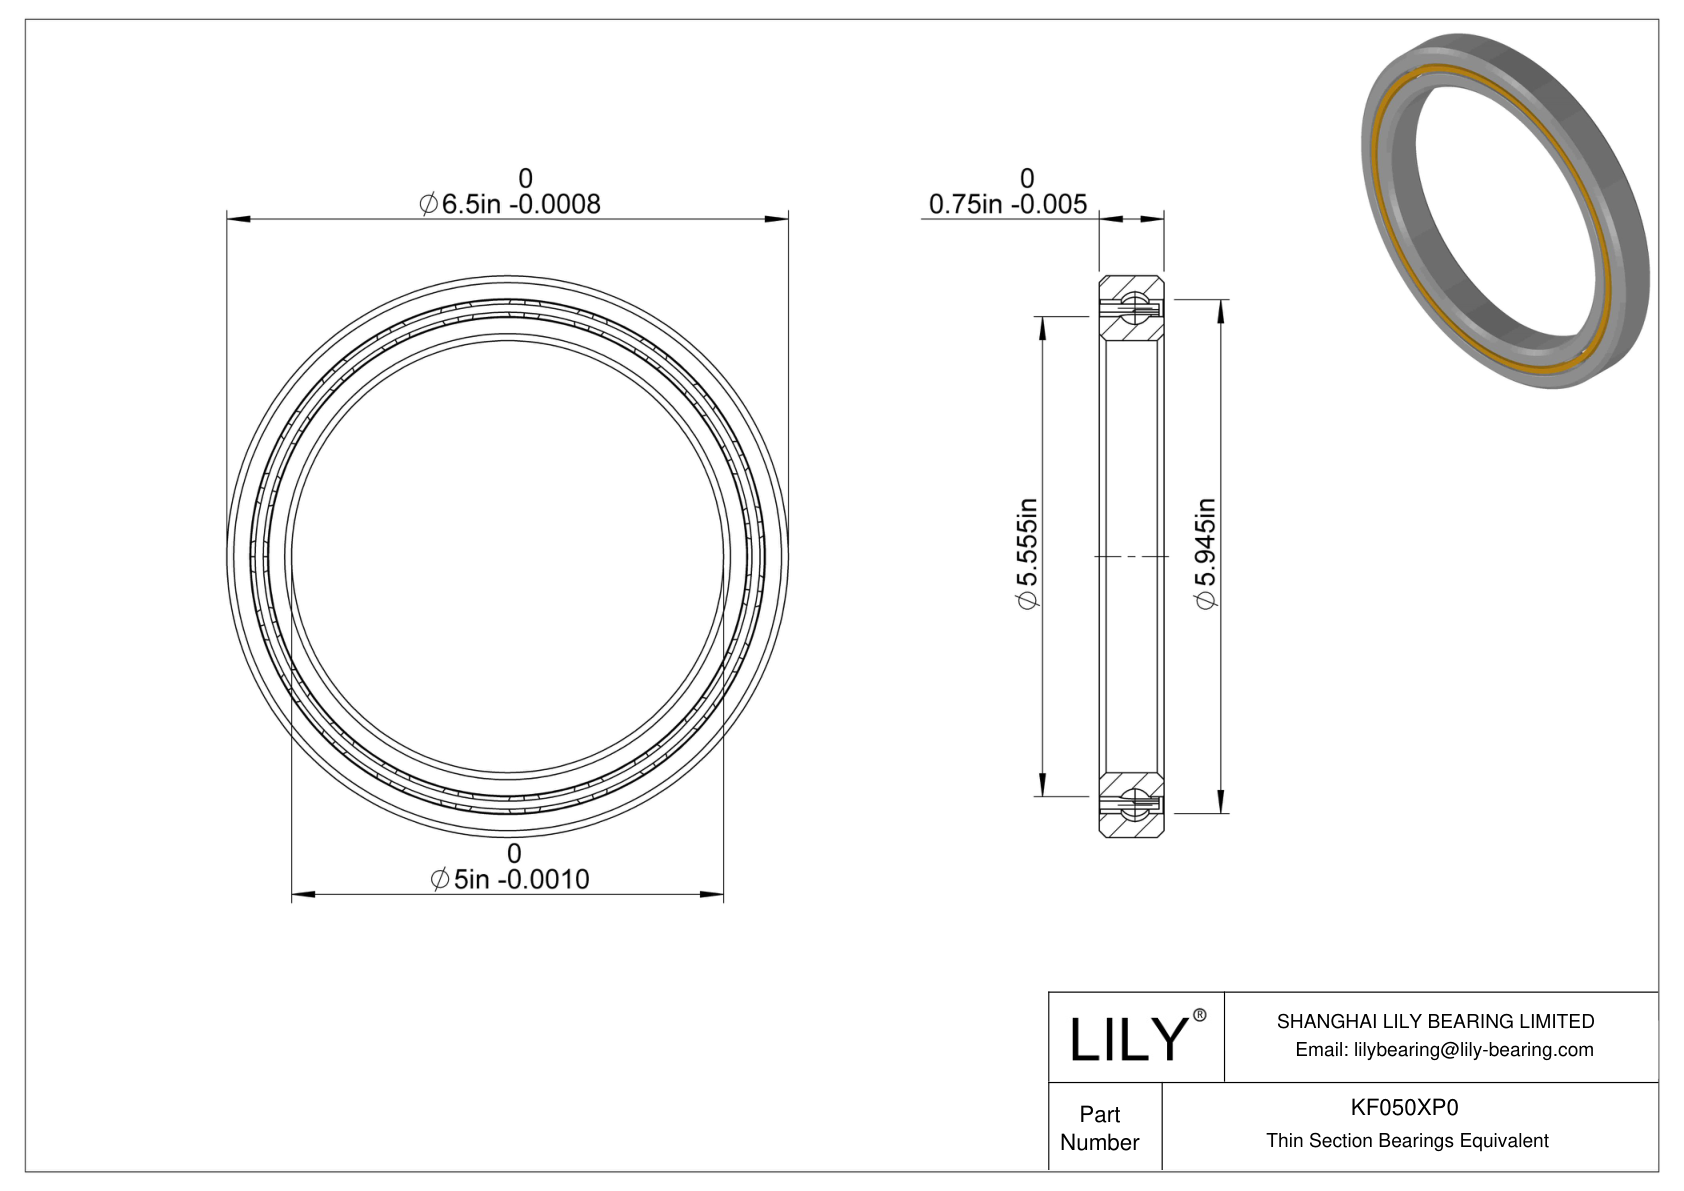 KF050XP0 Constant Section (CS) Bearings cad drawing